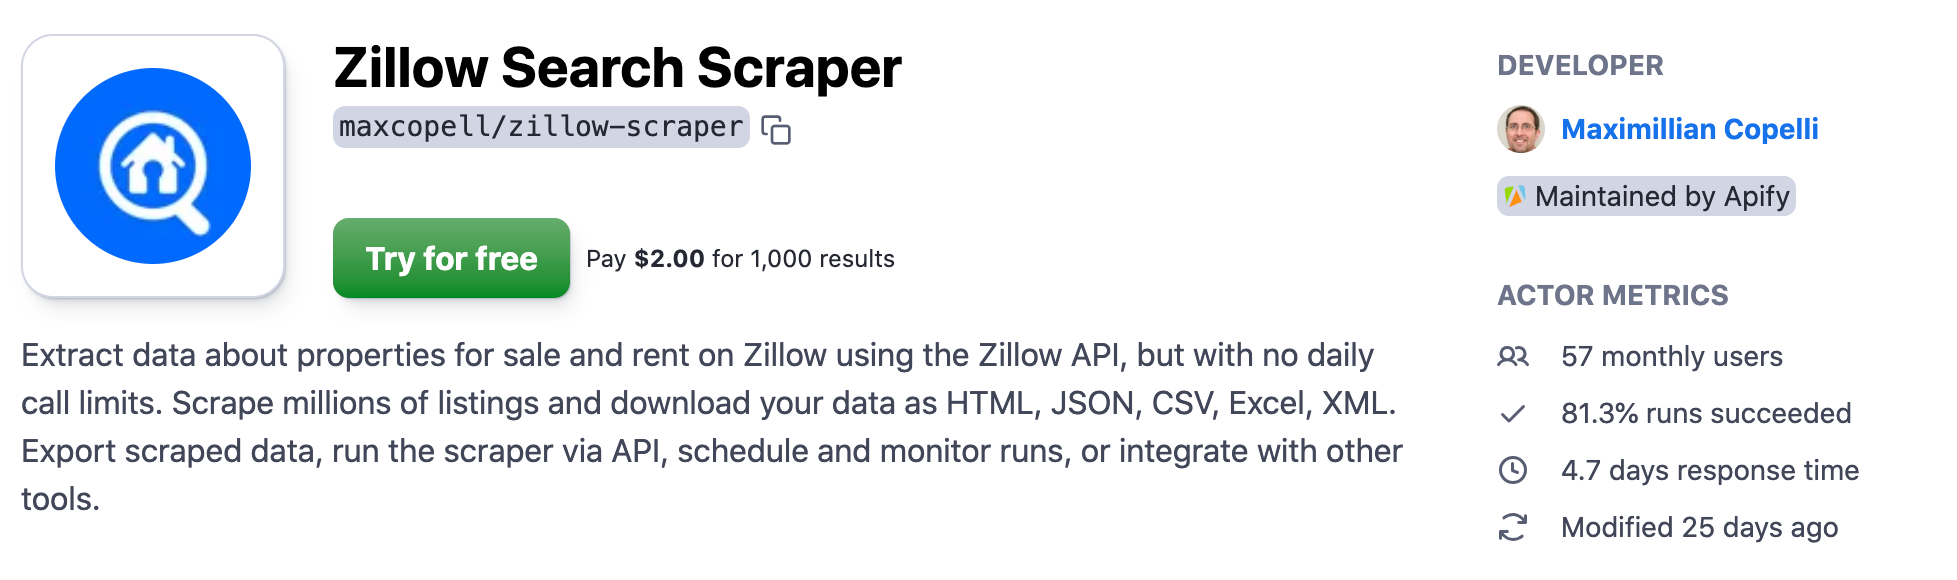 Try Zillow Search Scraper for free